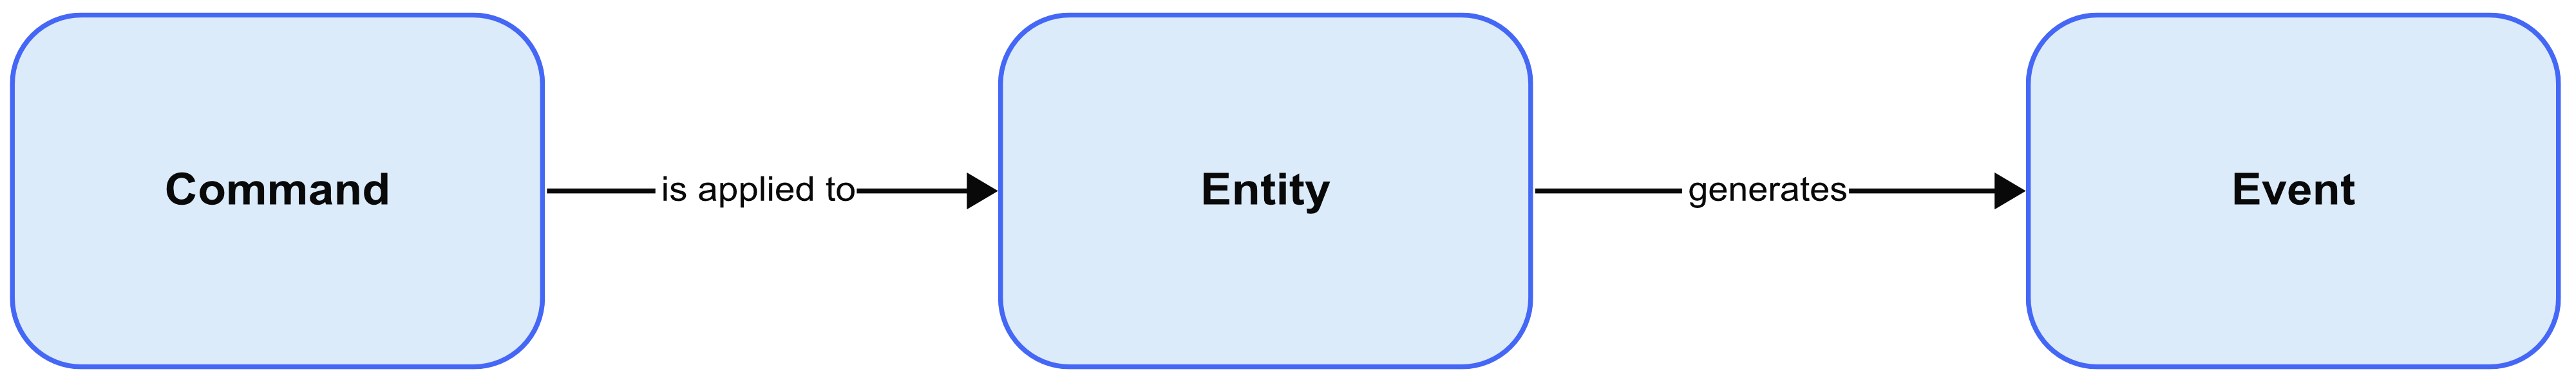 Command Entity Event Relationship